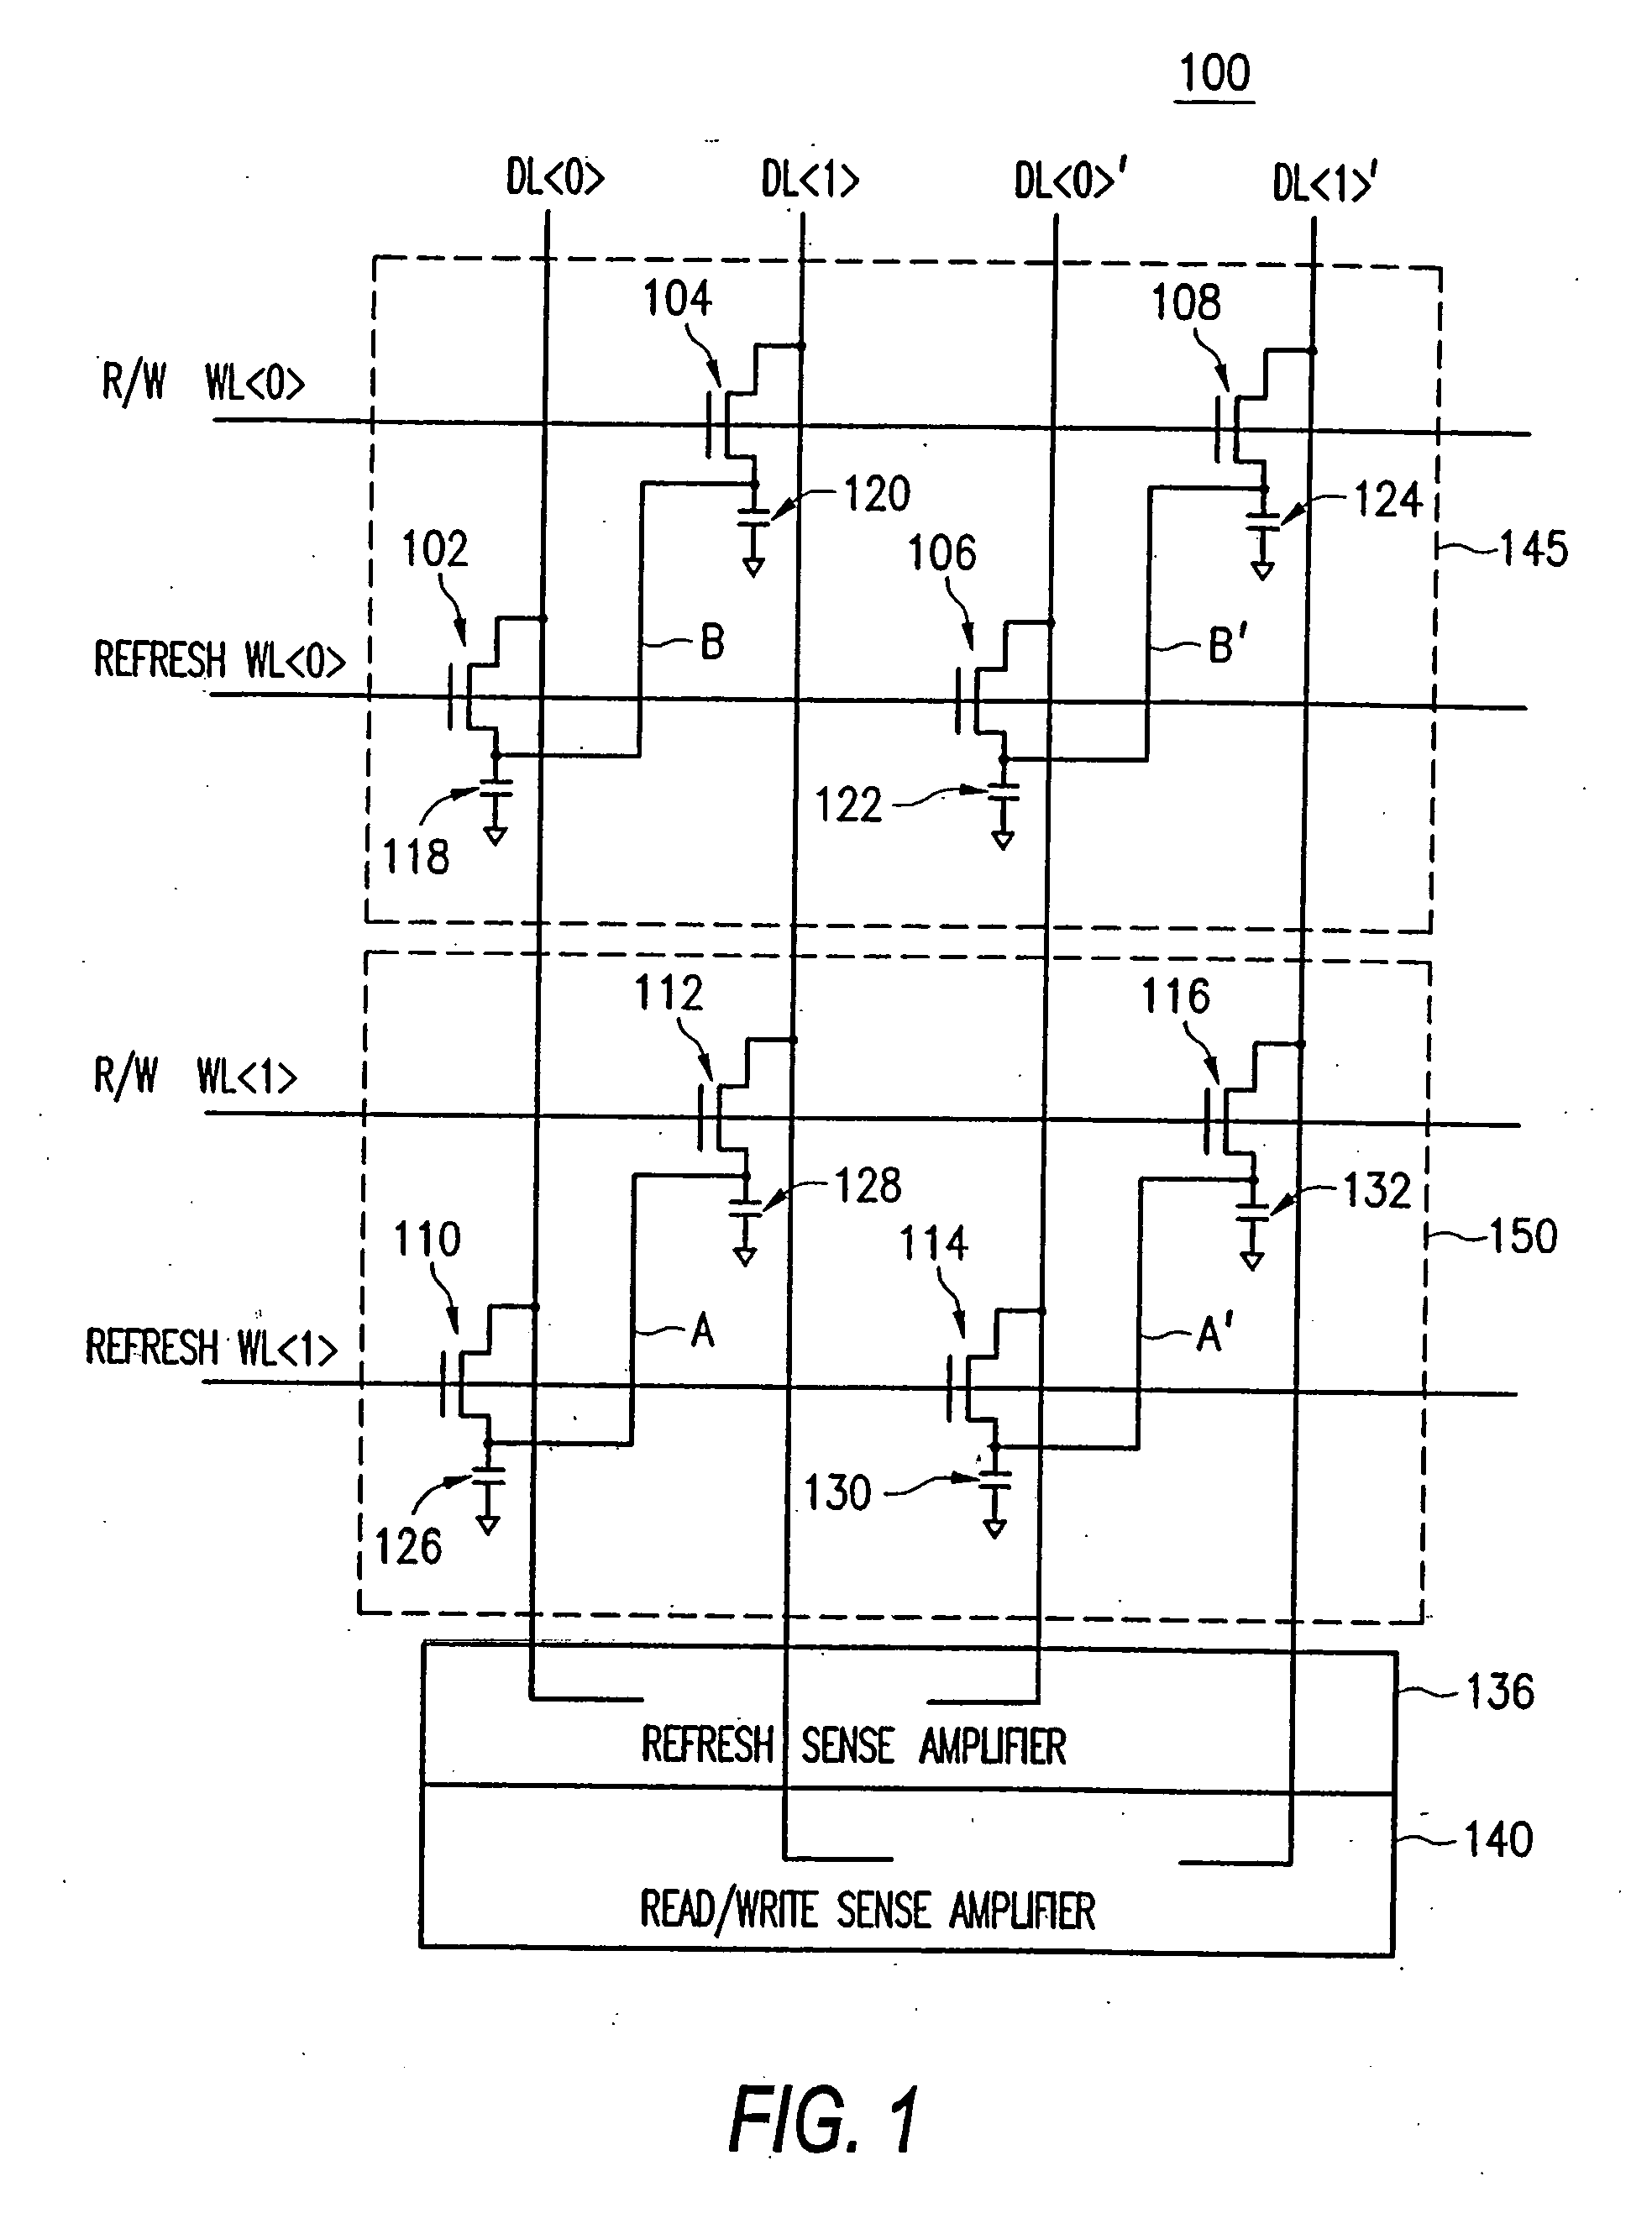 Method of operating a memory cell